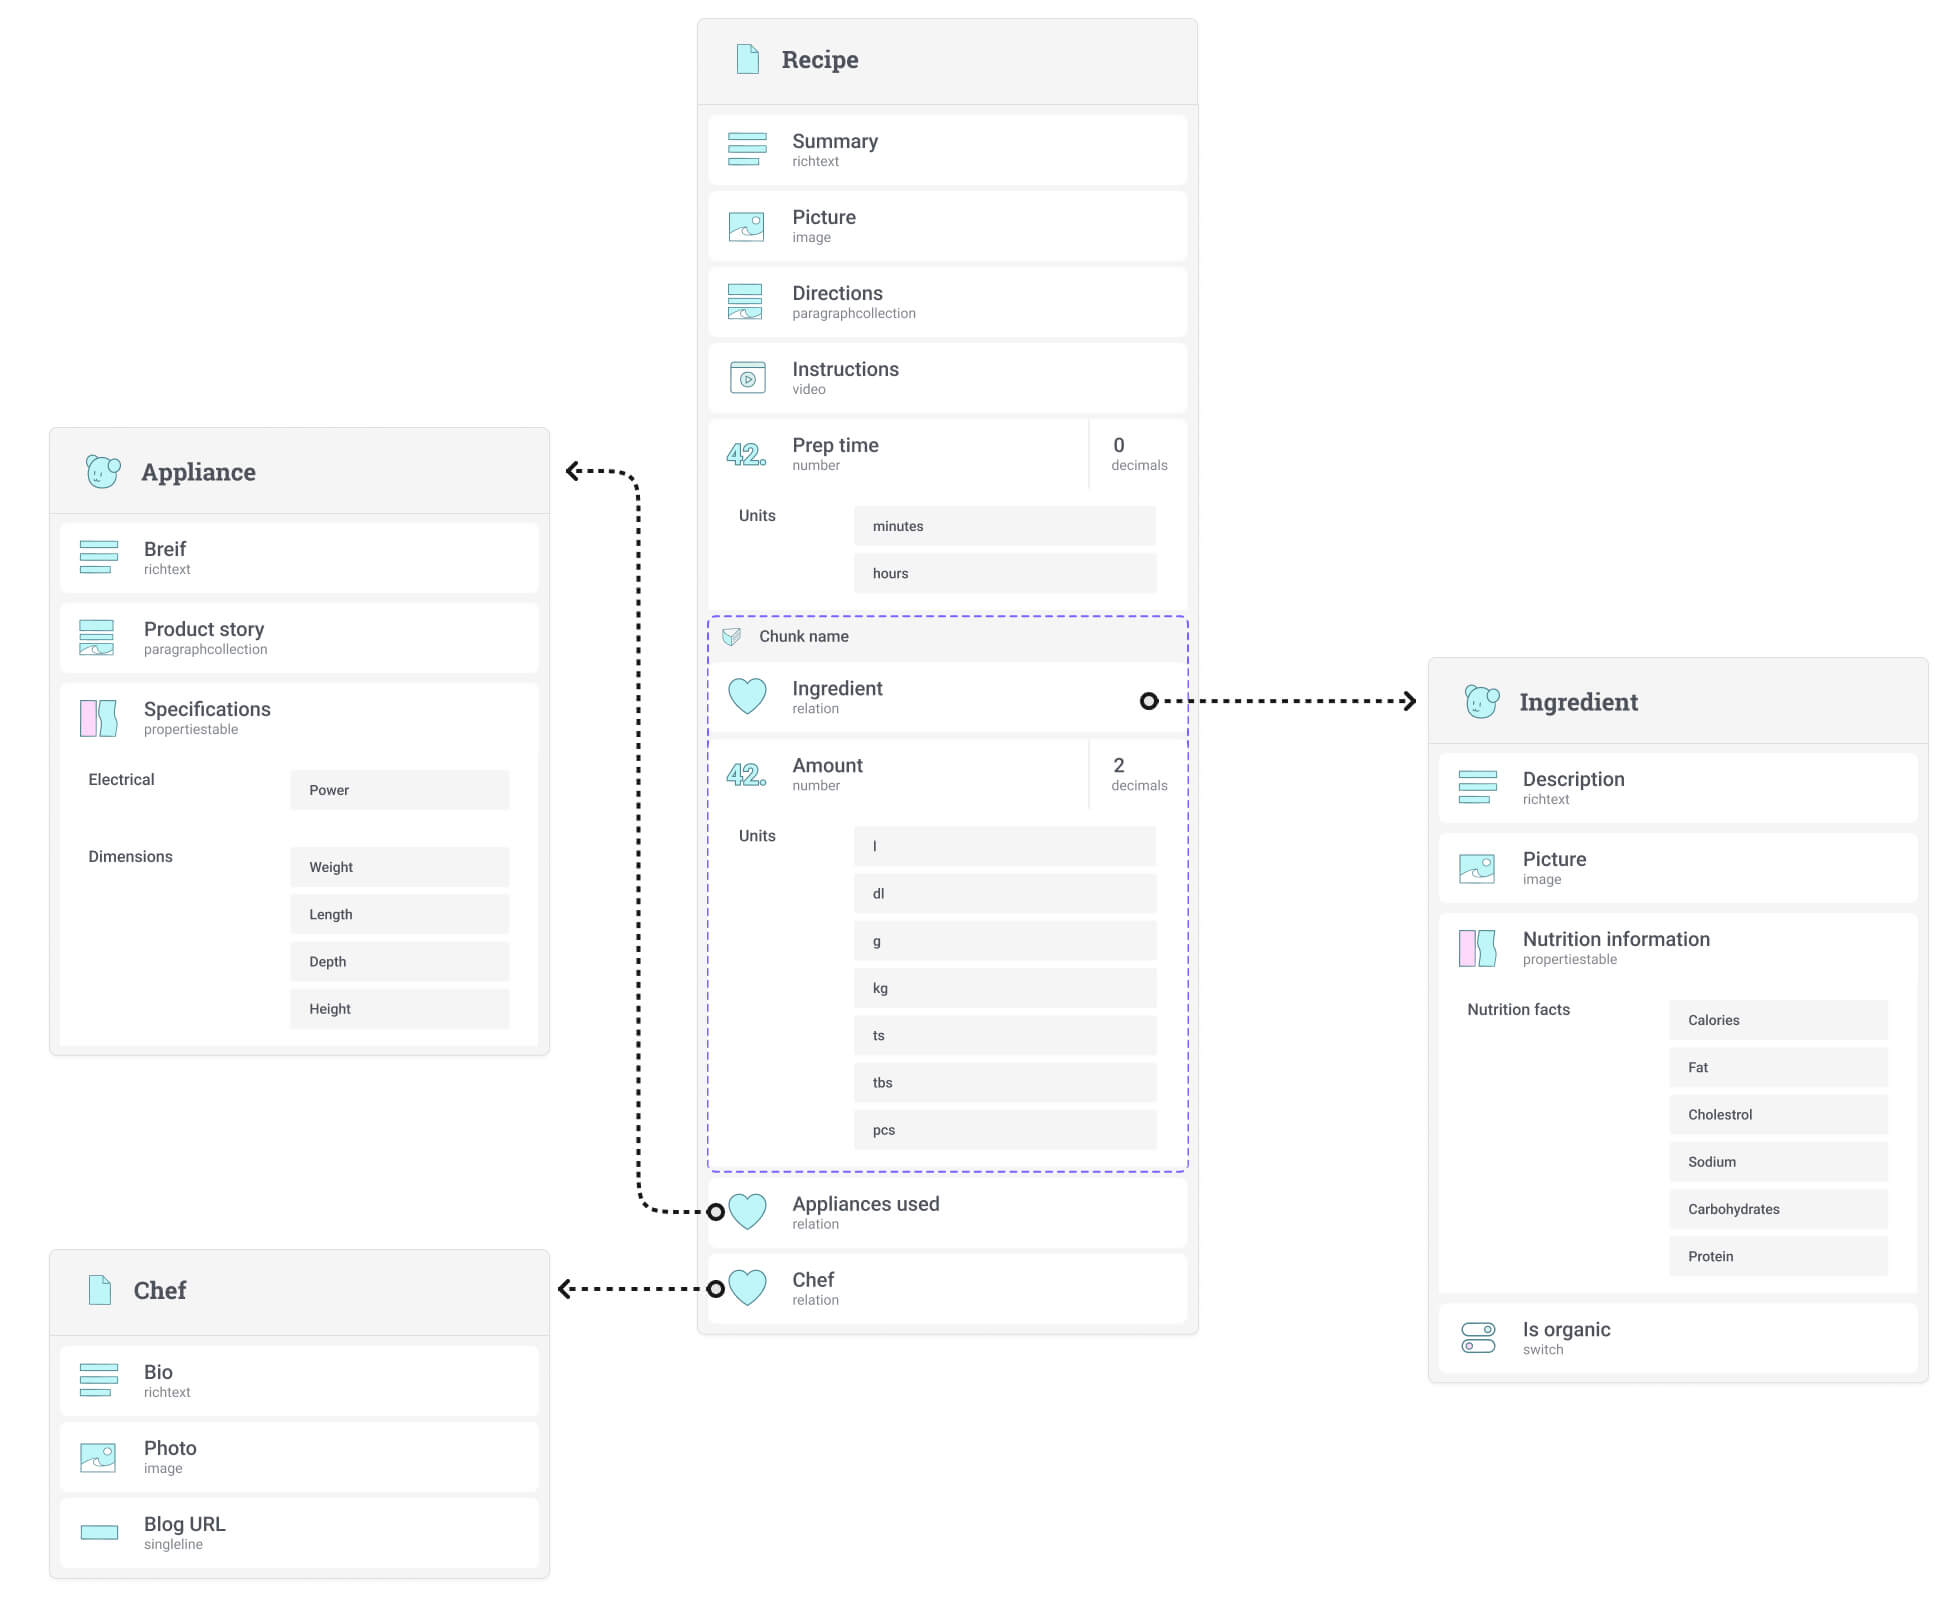 Content model created in Figma